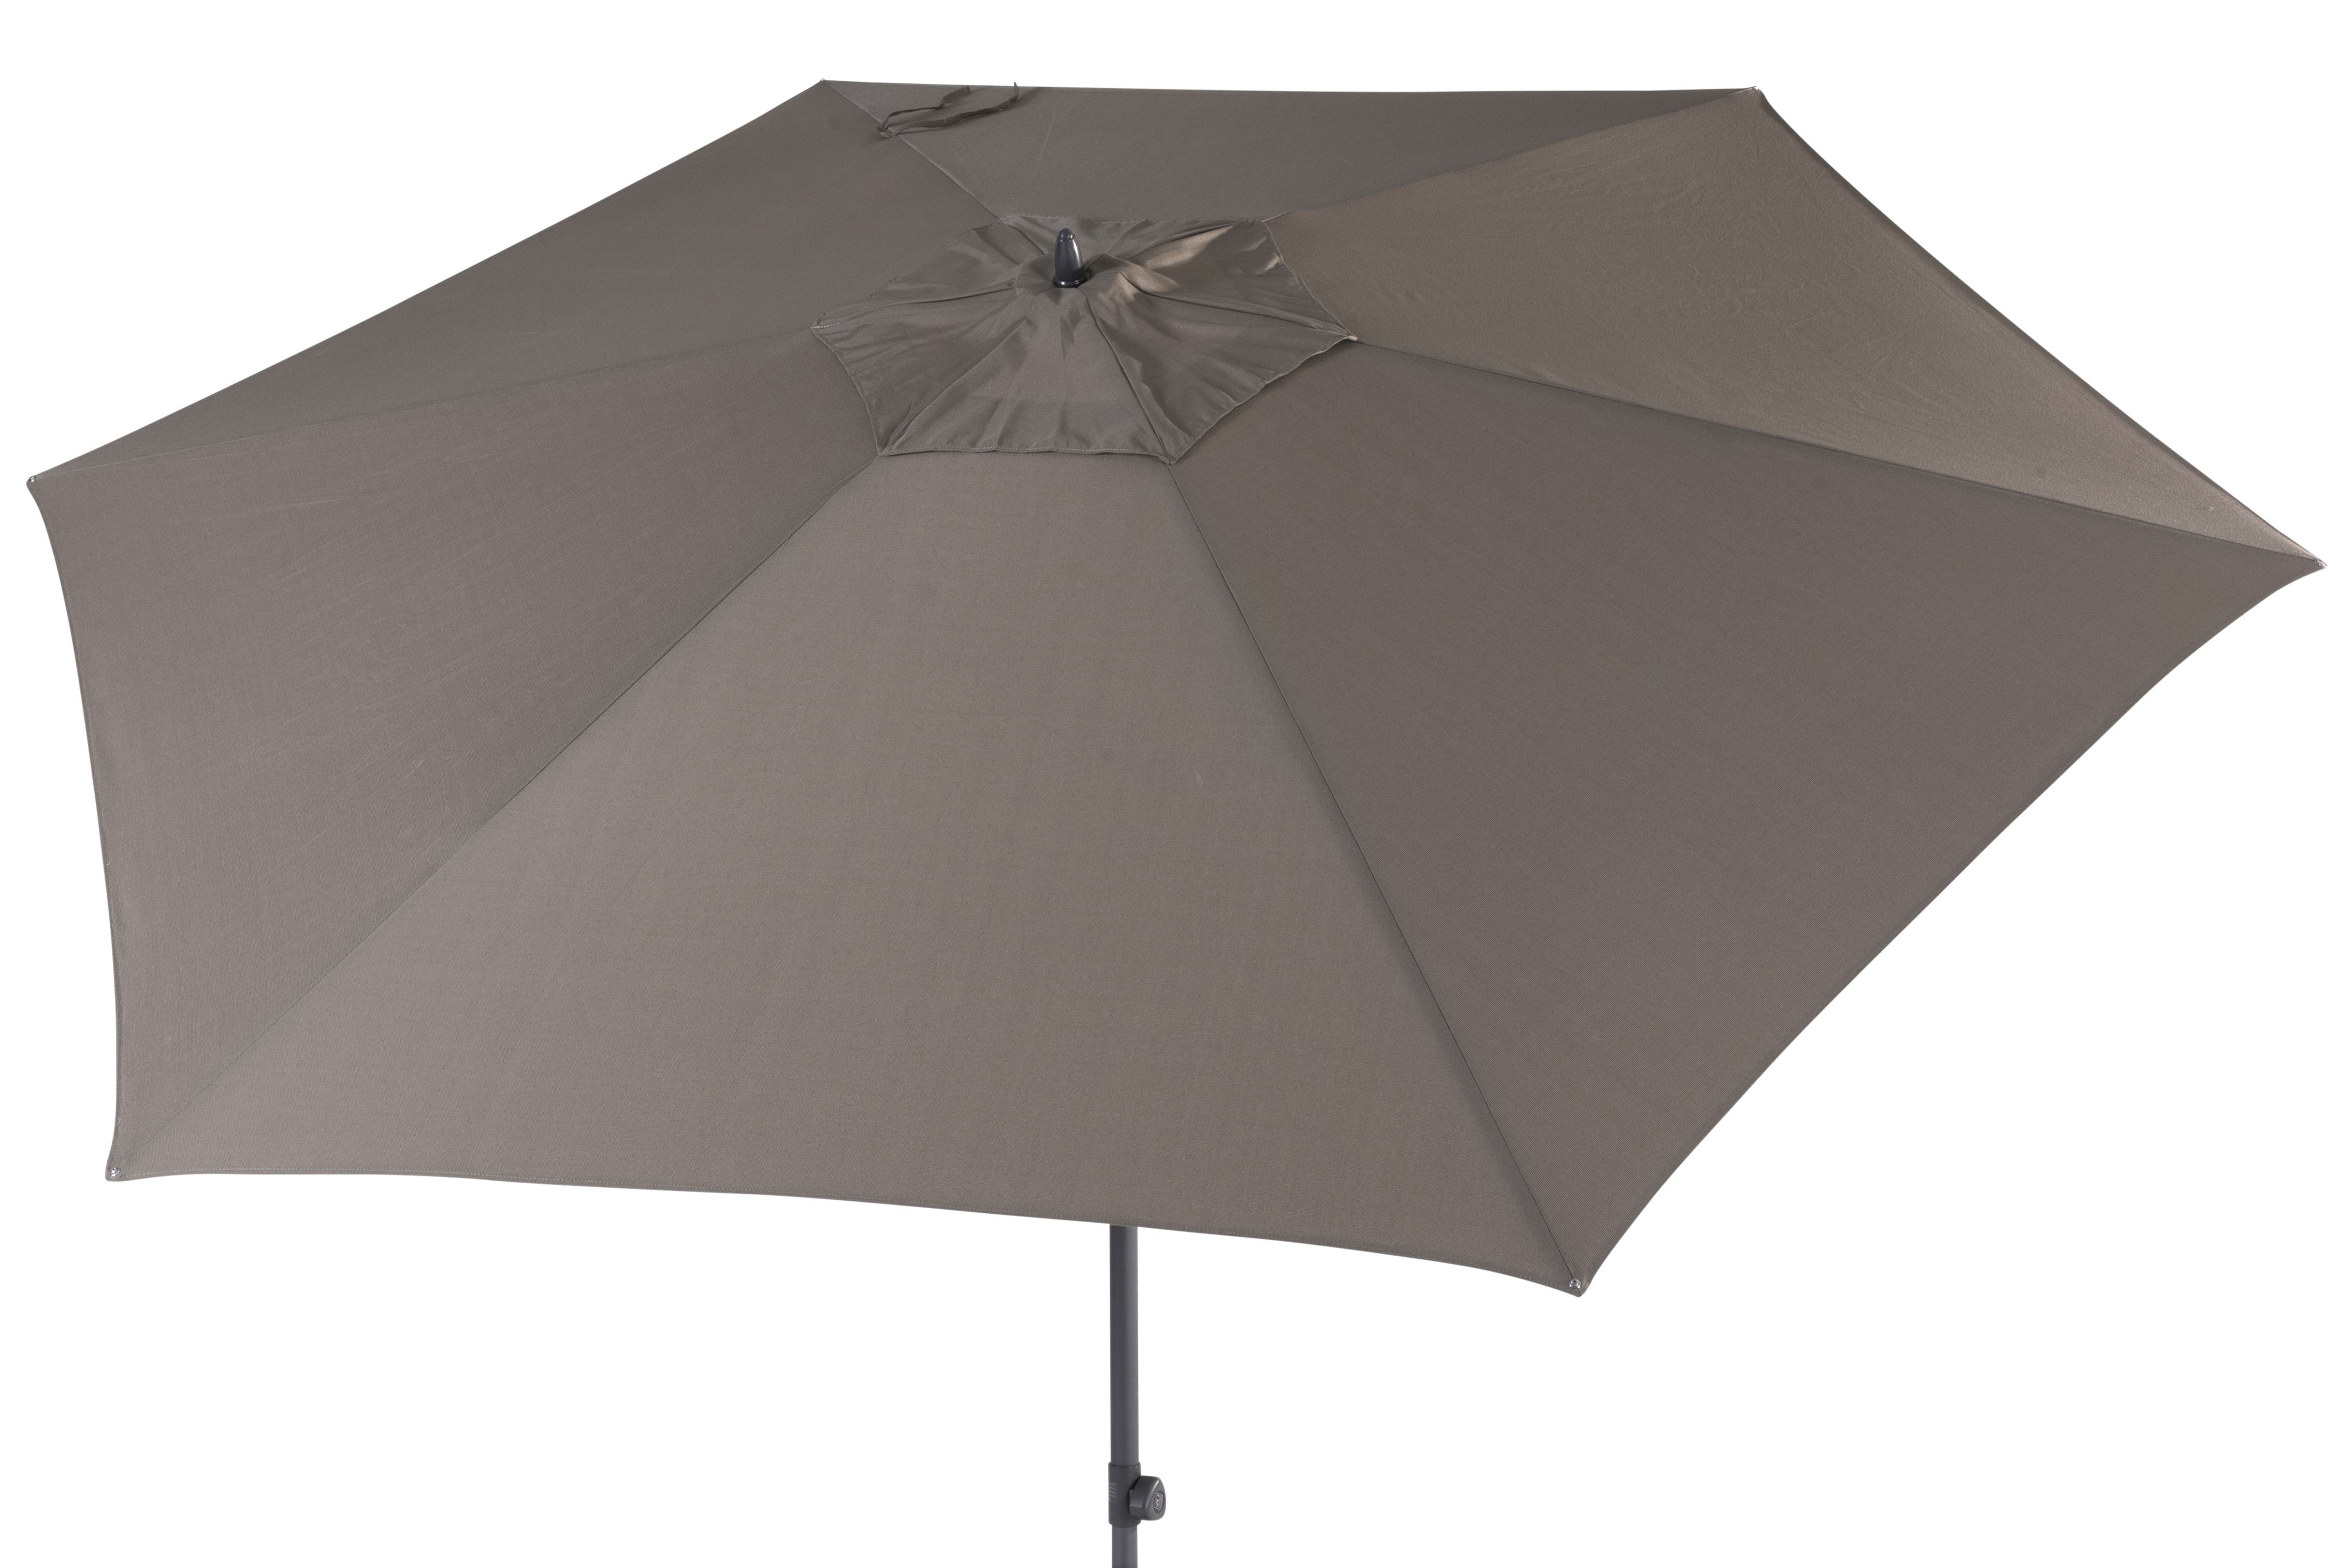 4 Seasons Outdoor Azzurro 300cm rond parasol Taupe